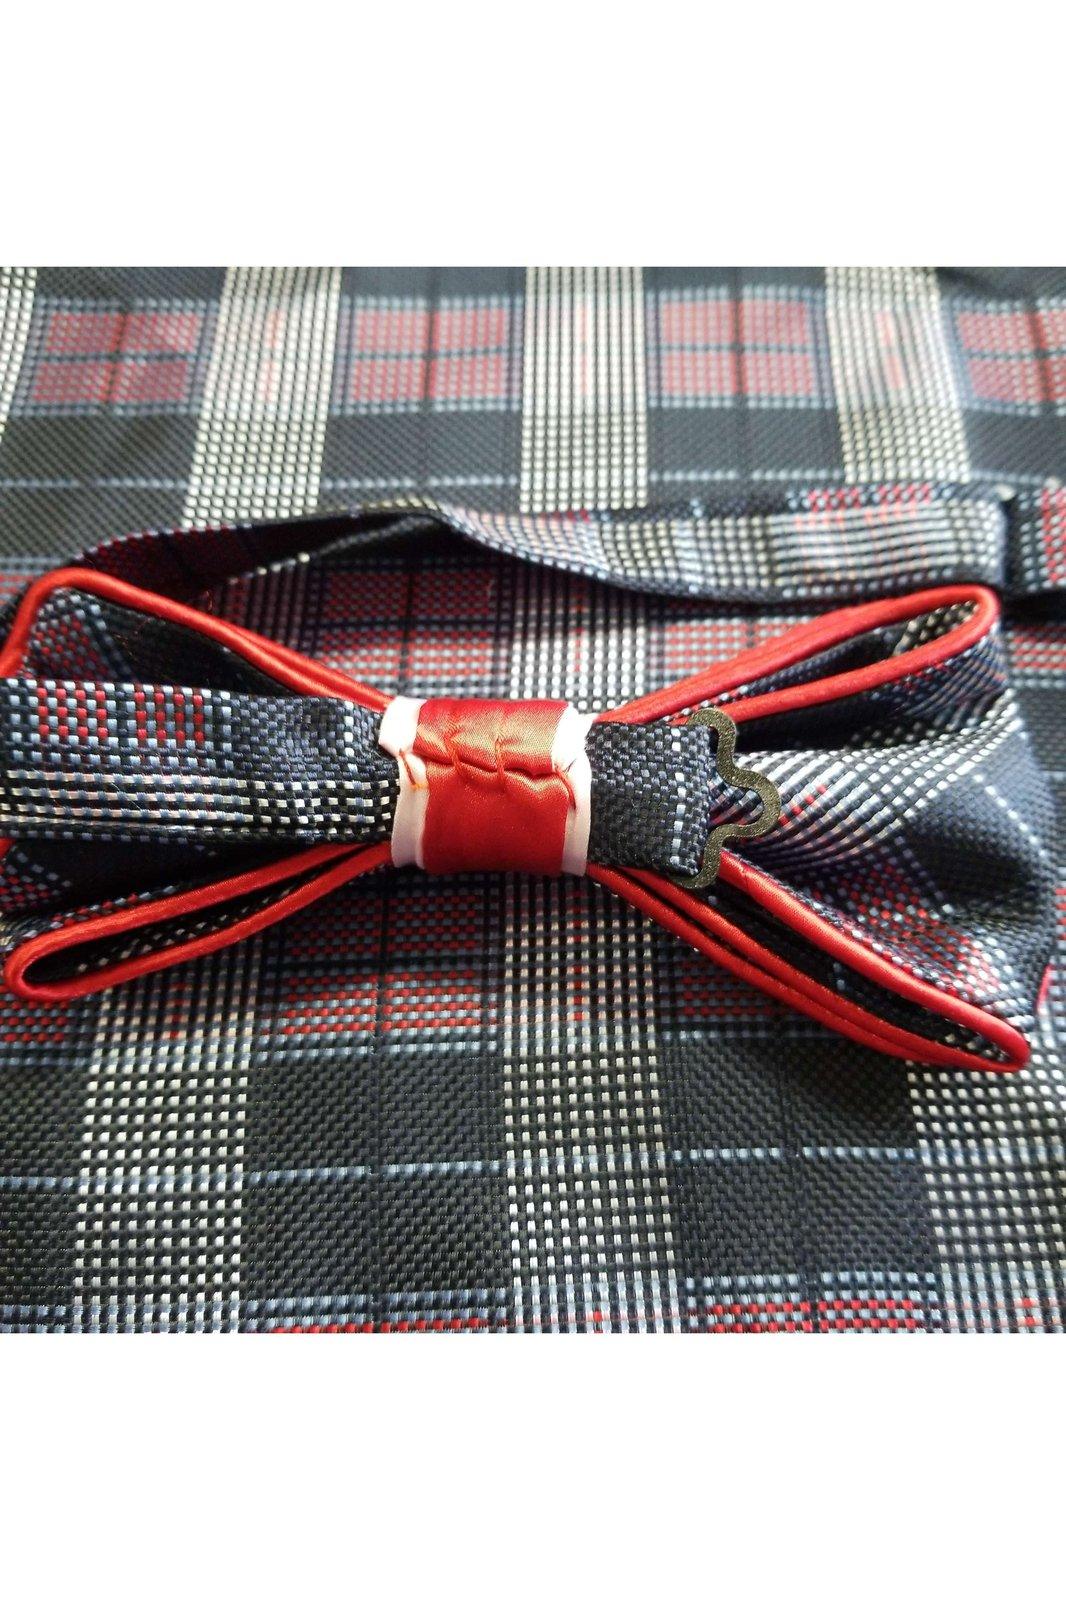 Unbranded men's custom blue and red bow tie and scarf